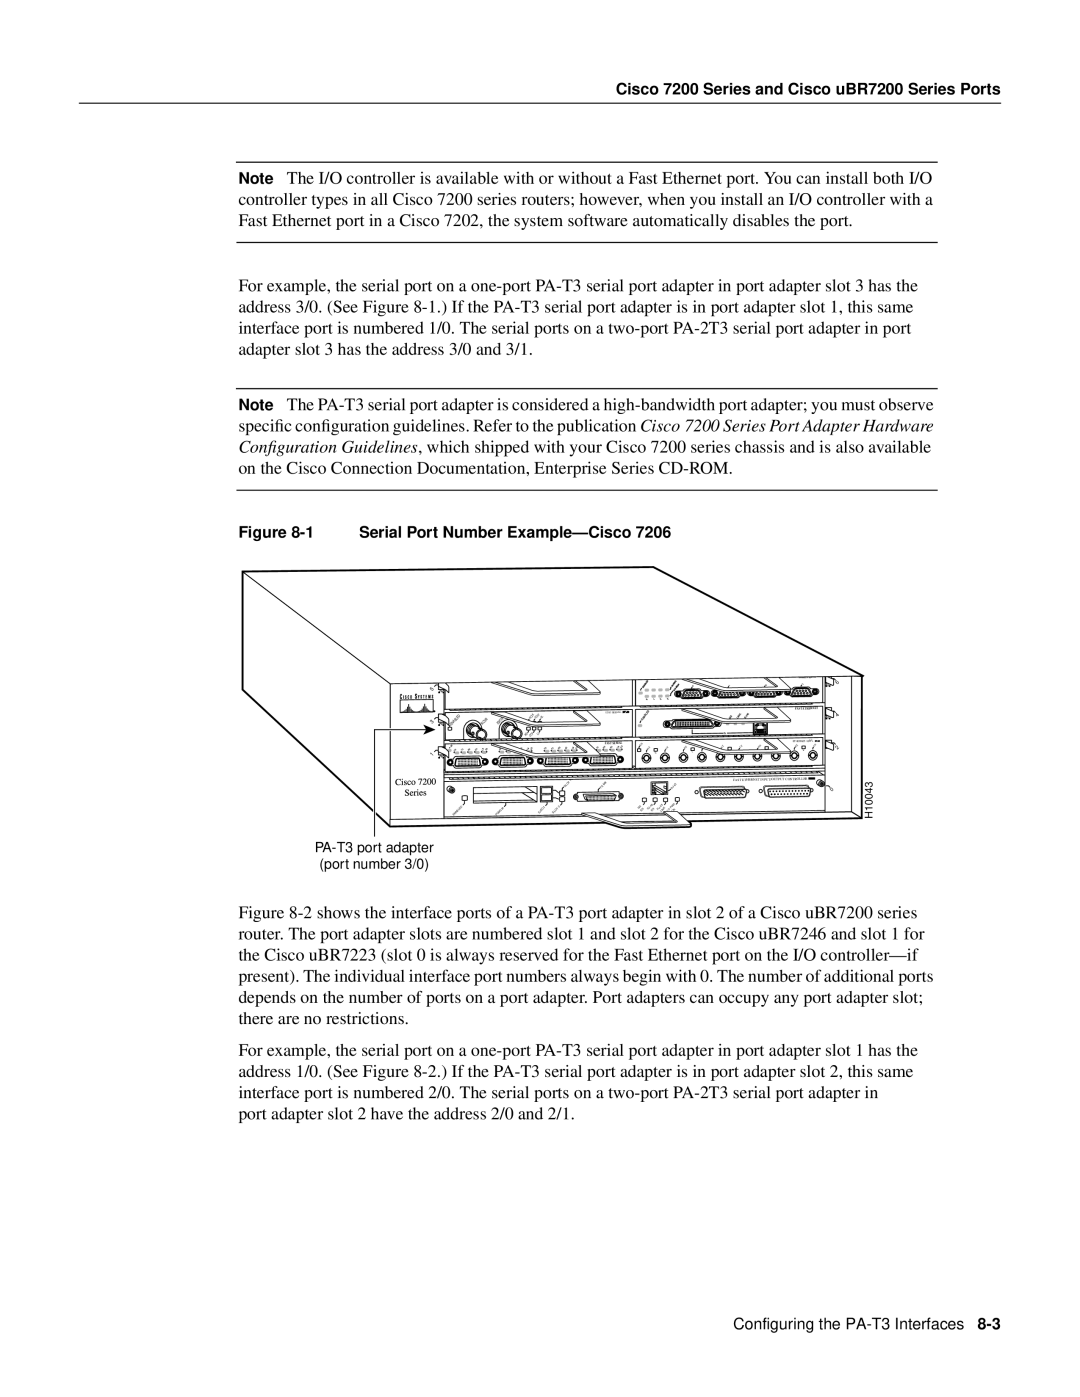 Cisco Systems PA-T3 manual Cisco 7200 Series and Cisco uBR7200 Series Ports, 1 Serial Port Number Example-Cisco 